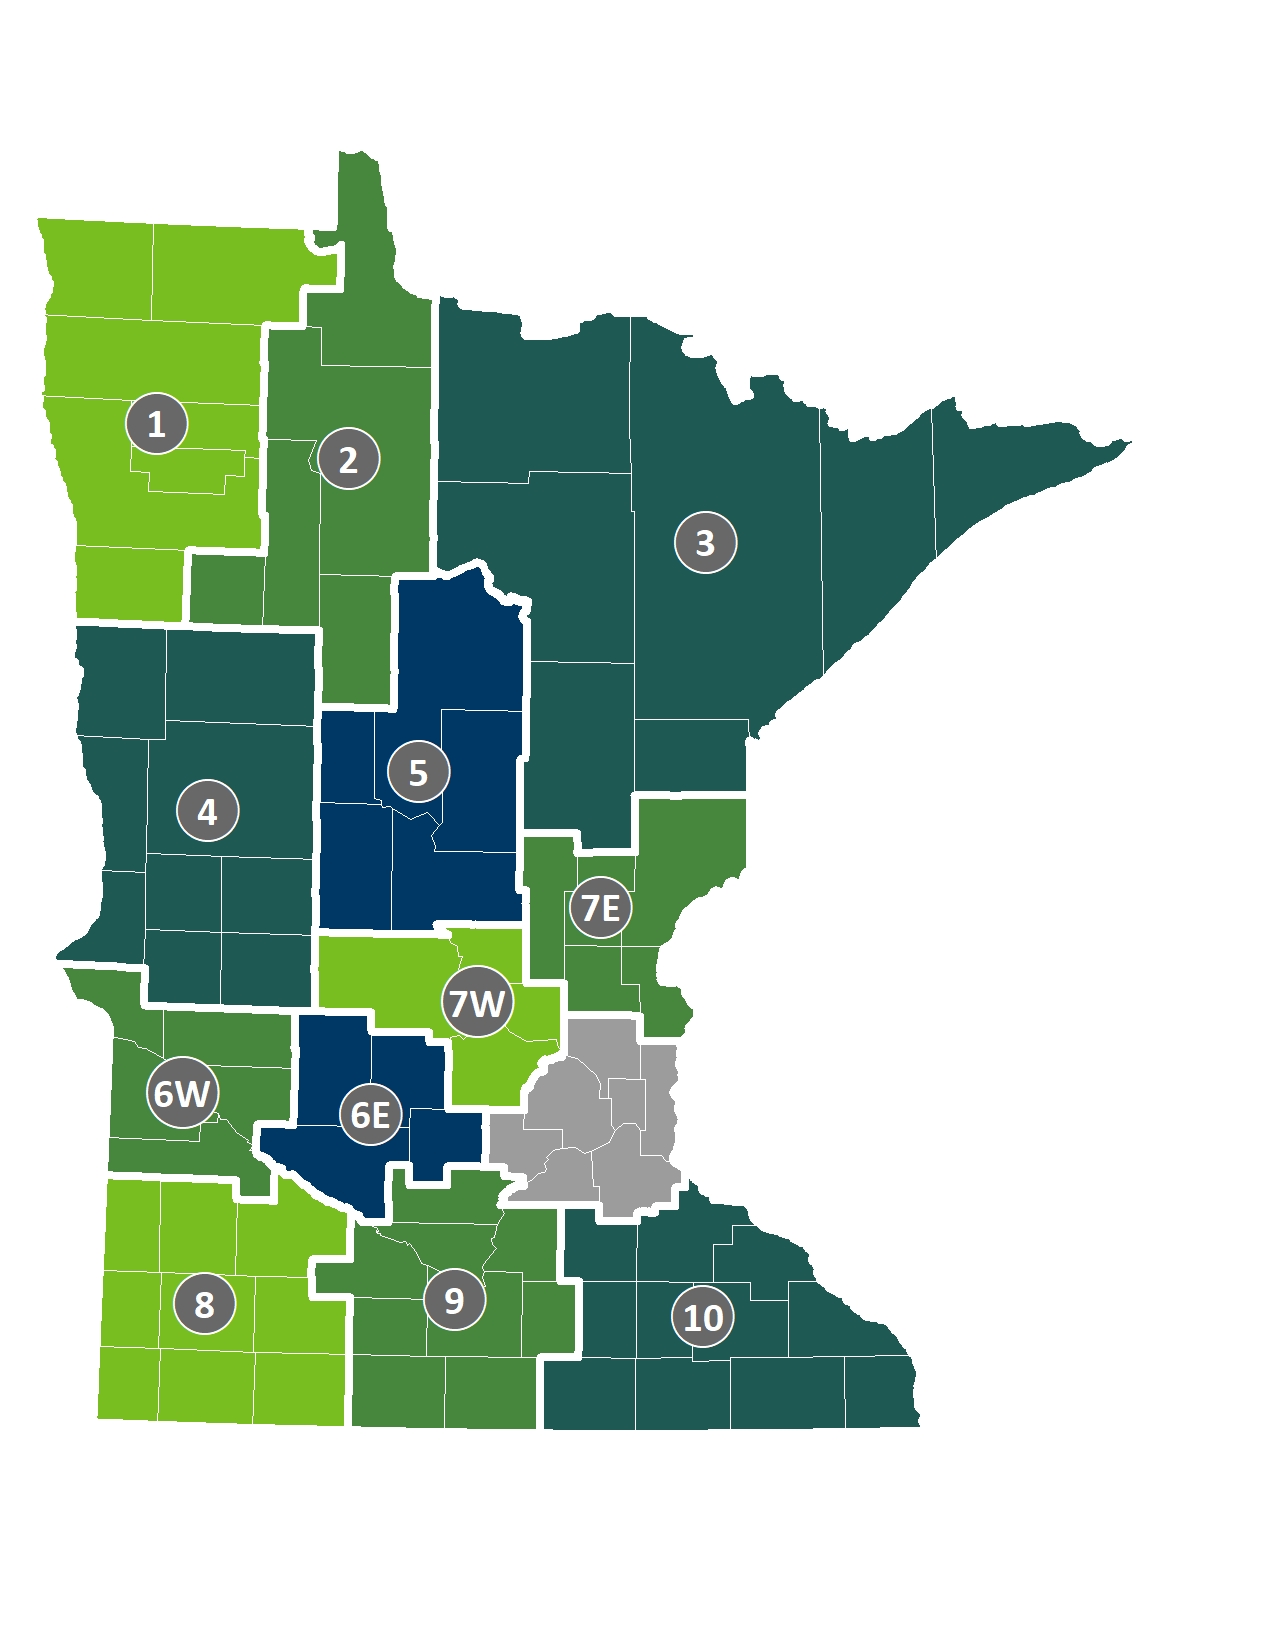 A map showing the 12 regional development areas in Minnesota, which follow county boundaries. Regions 1 and 2 are in northwest Minnesota. Region 3 is in northeast Minnesota. Region 4 is in west central Minnesota. Regions 5, 6E, and 7W are in central Minnesota. Region 7E is in east central Minnesota. Regions 6W and 8 are in southwest Minnesota. Region 9 is in south central Minnesota. Region 10 is in southeast Minnesota. The seven county Twin Cities metro area is not in a regional development area